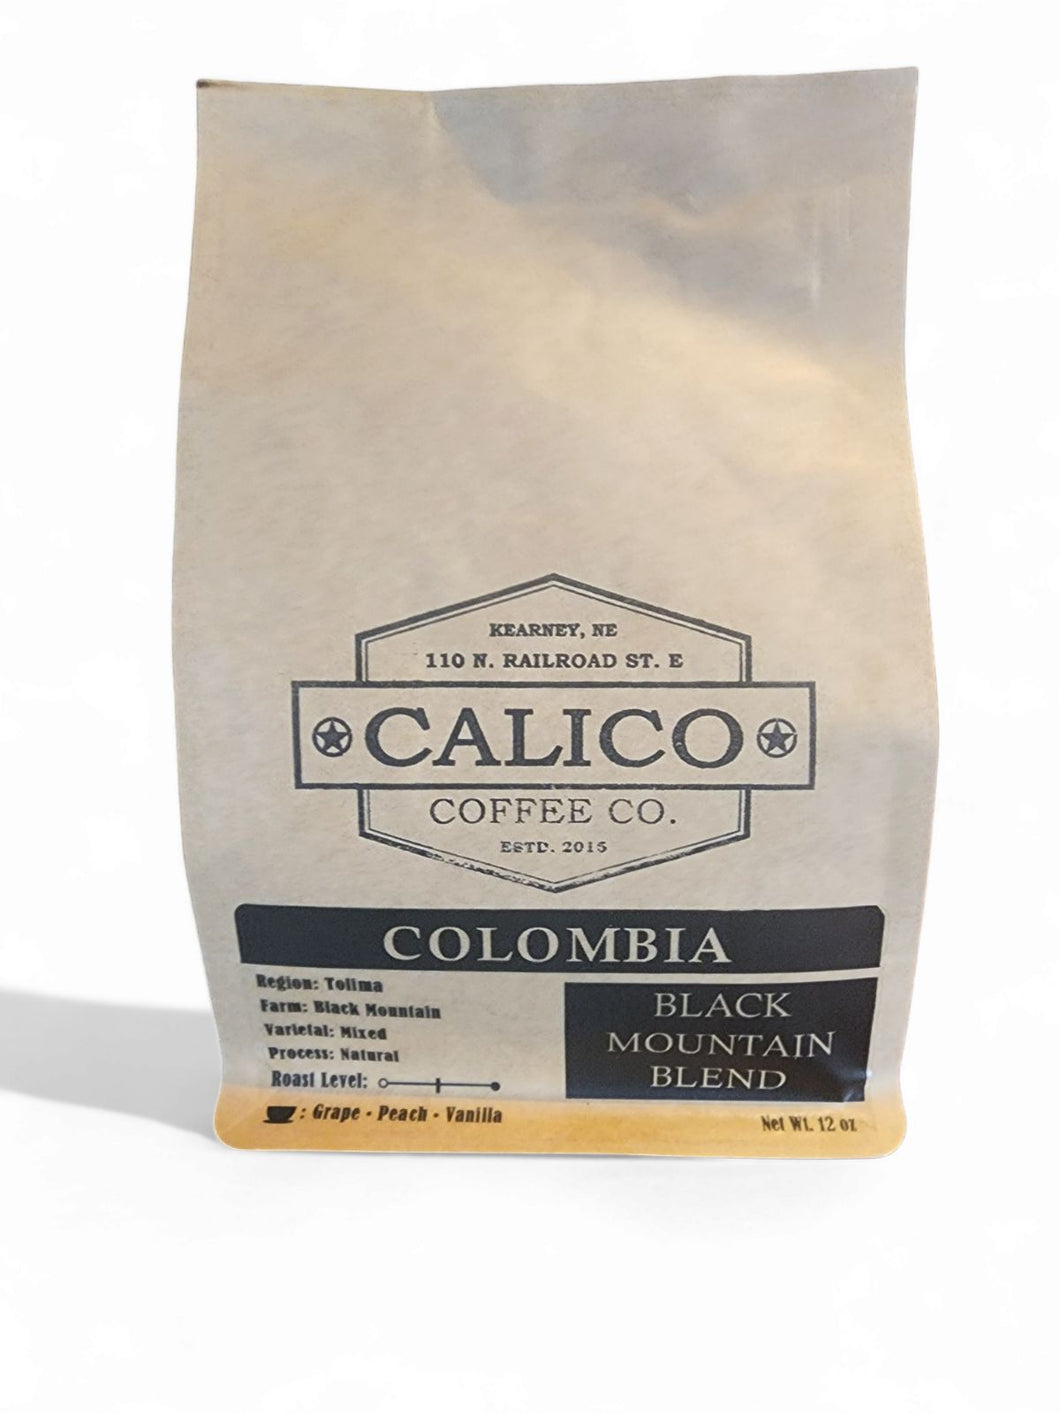 Colombia - Black Mountain Blend